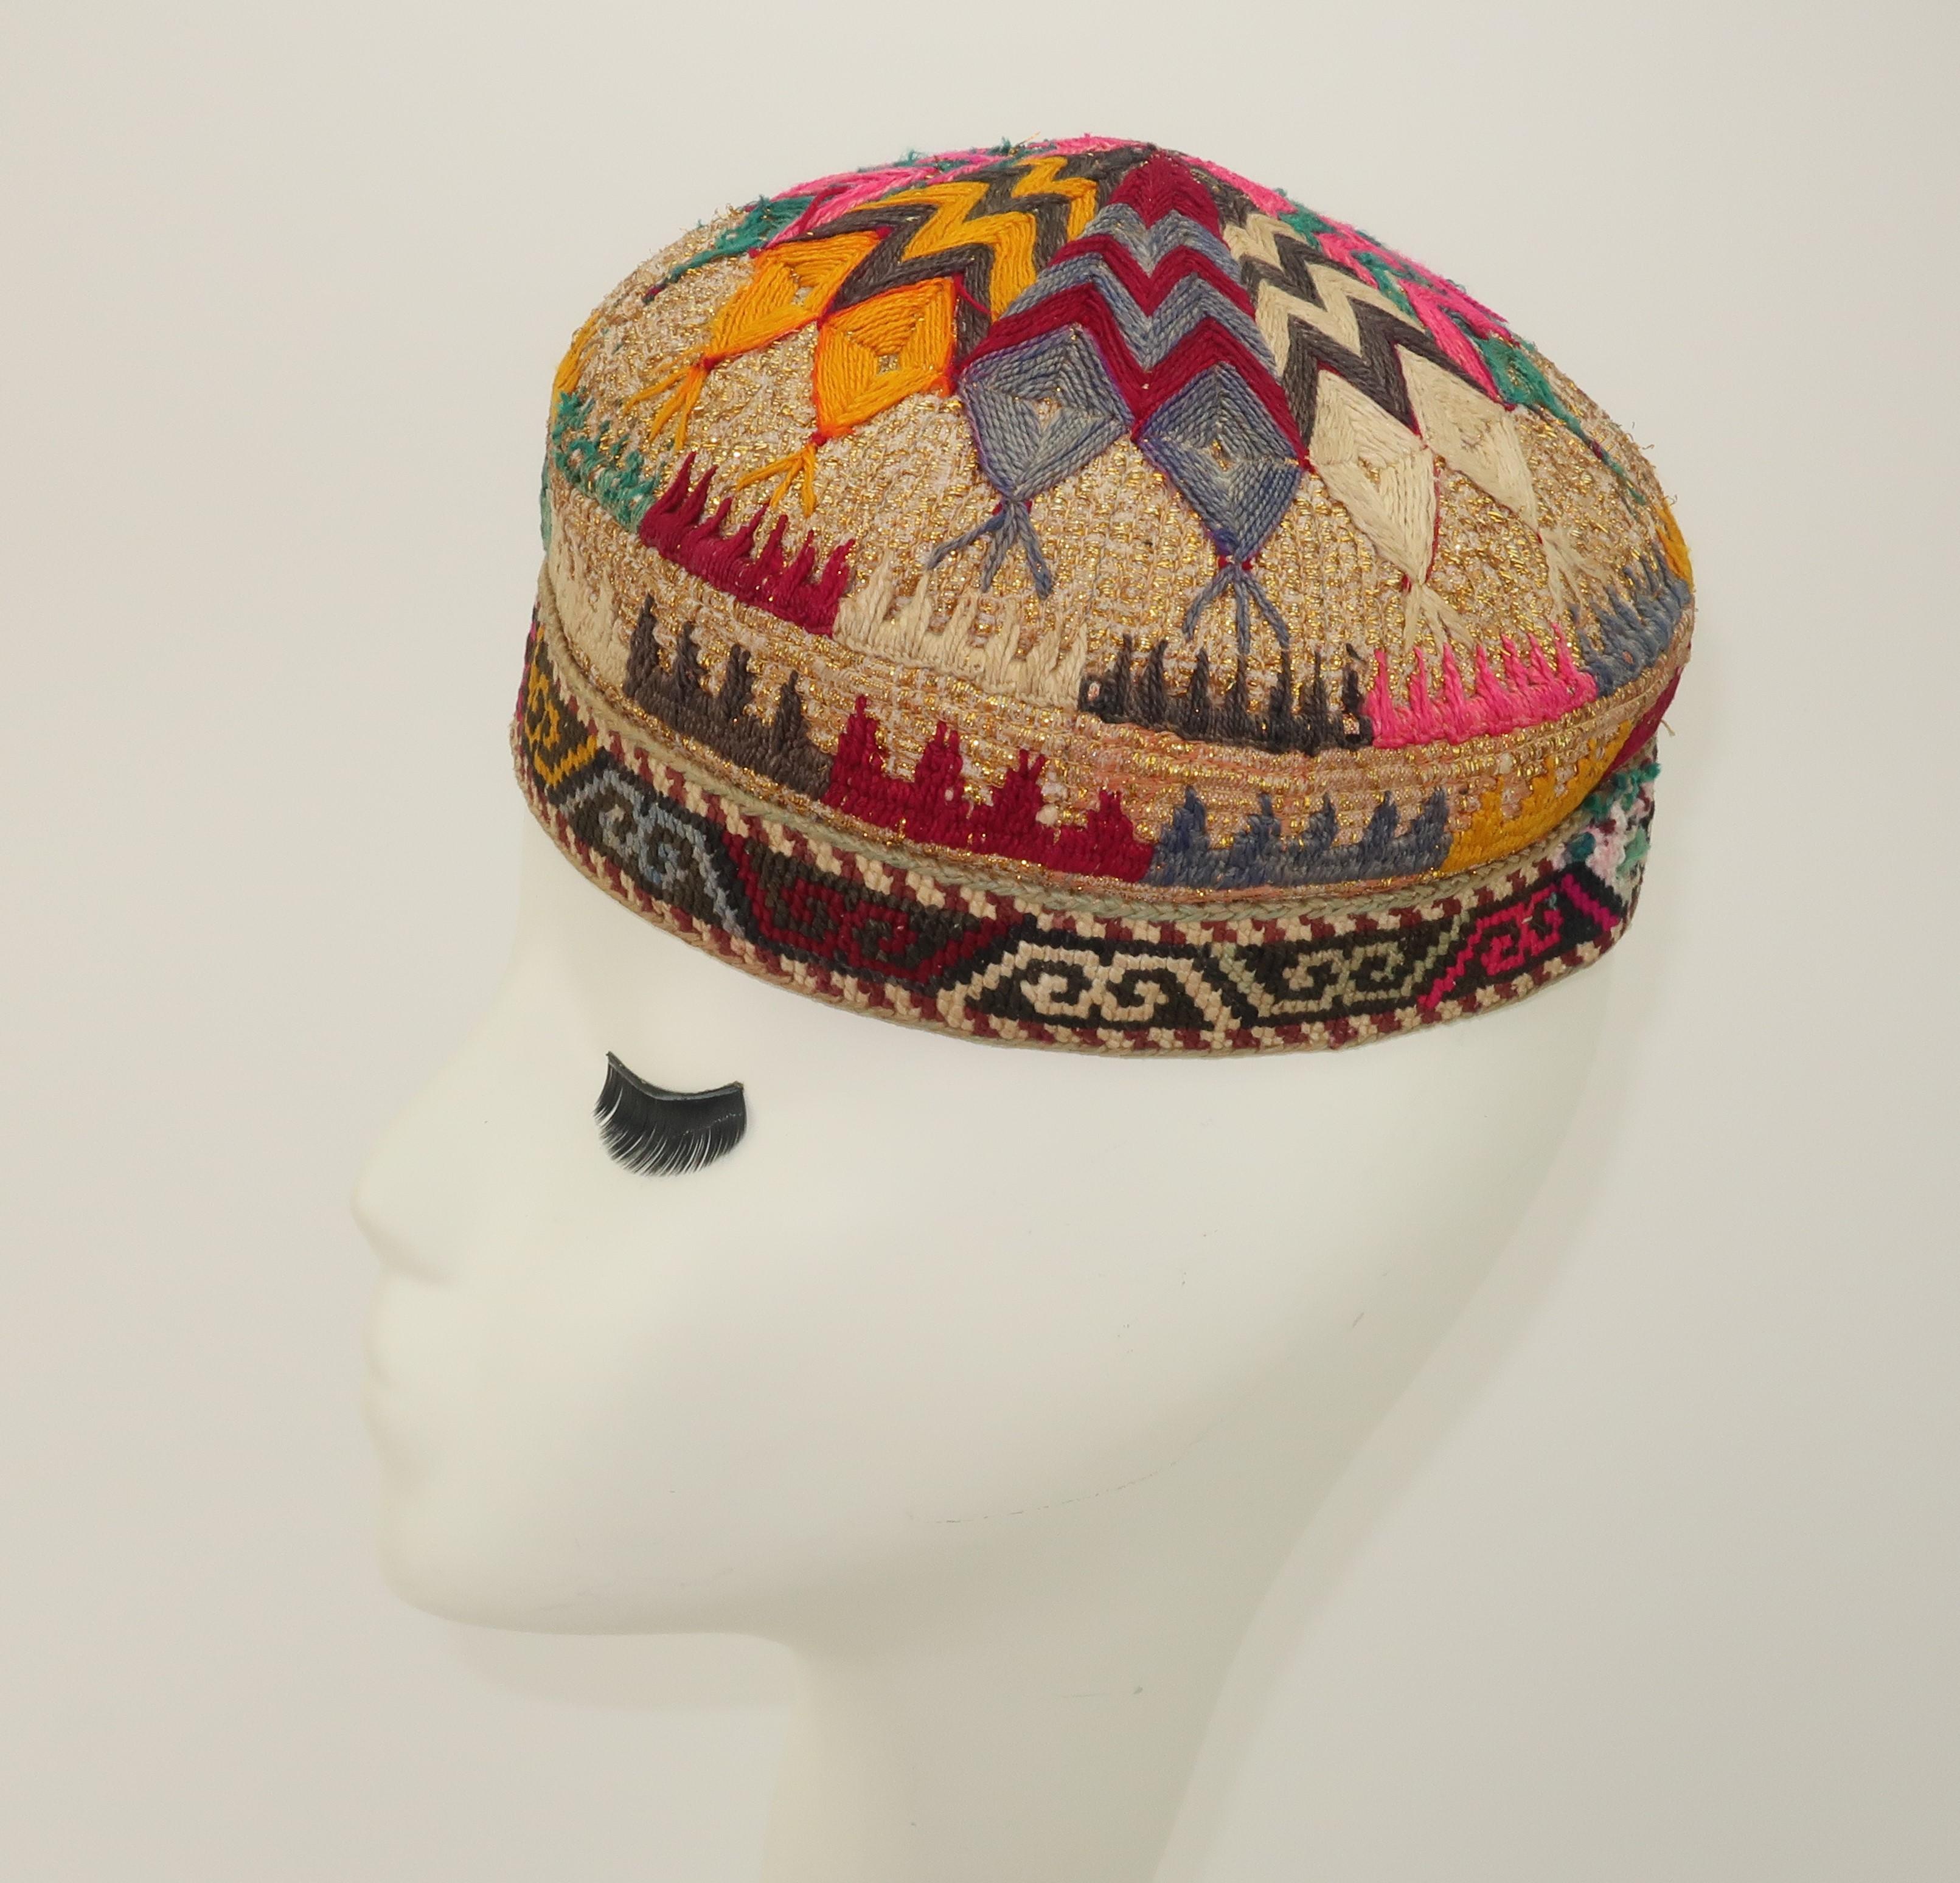 central asian hats